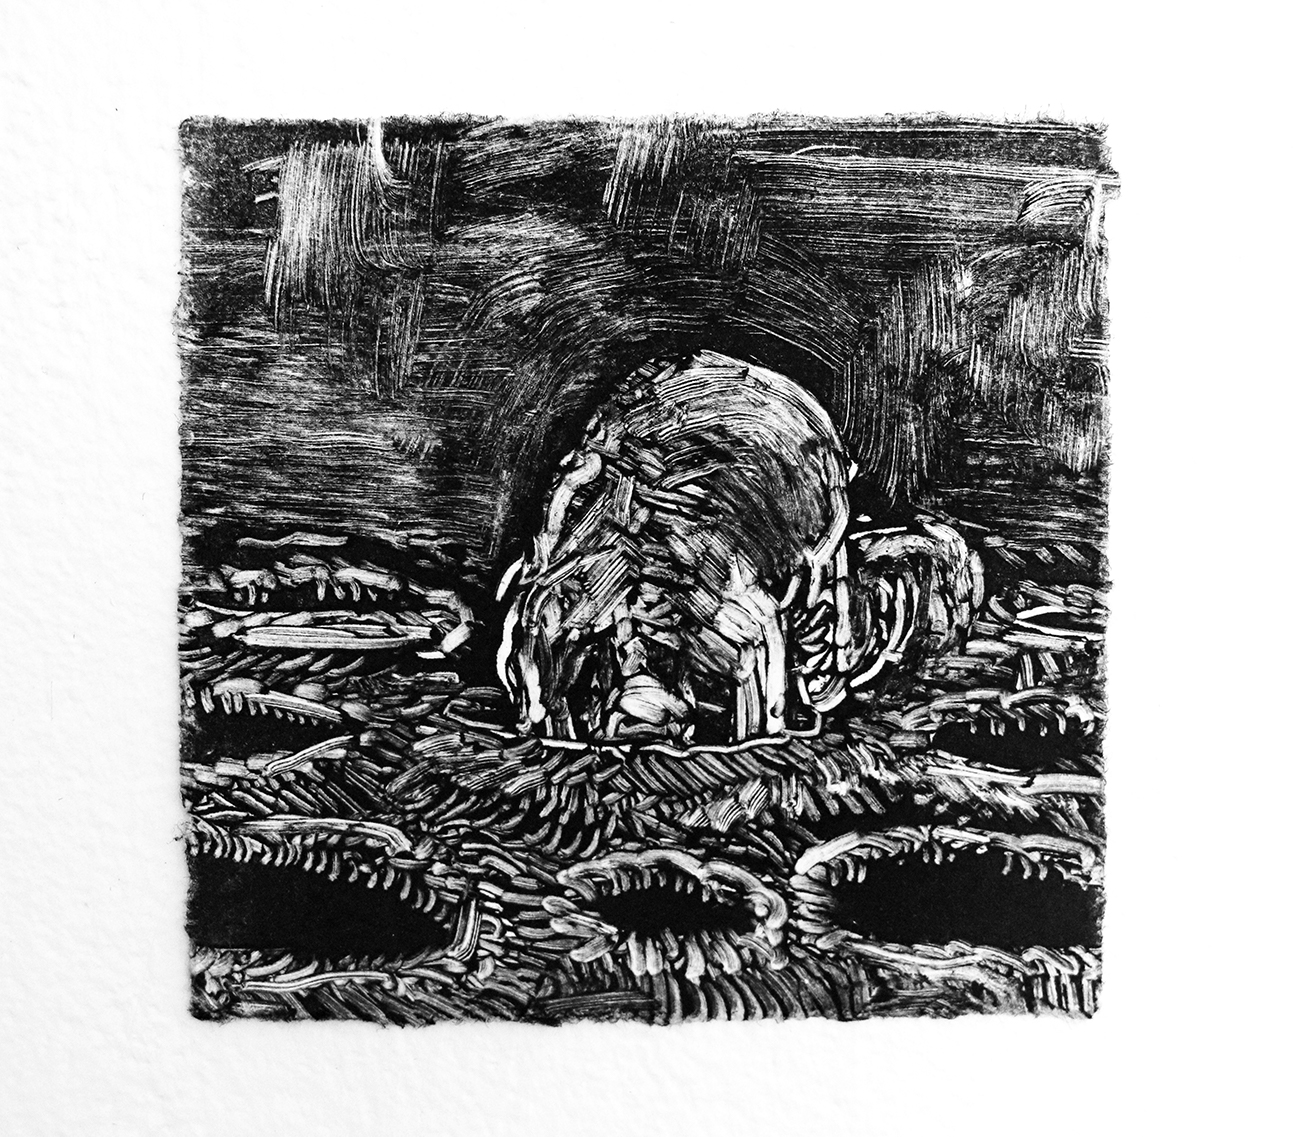 Claire Welch, Digging, 2021, Oil ink on Hahnemuhle paper, 10x10cm, photographed by artist 